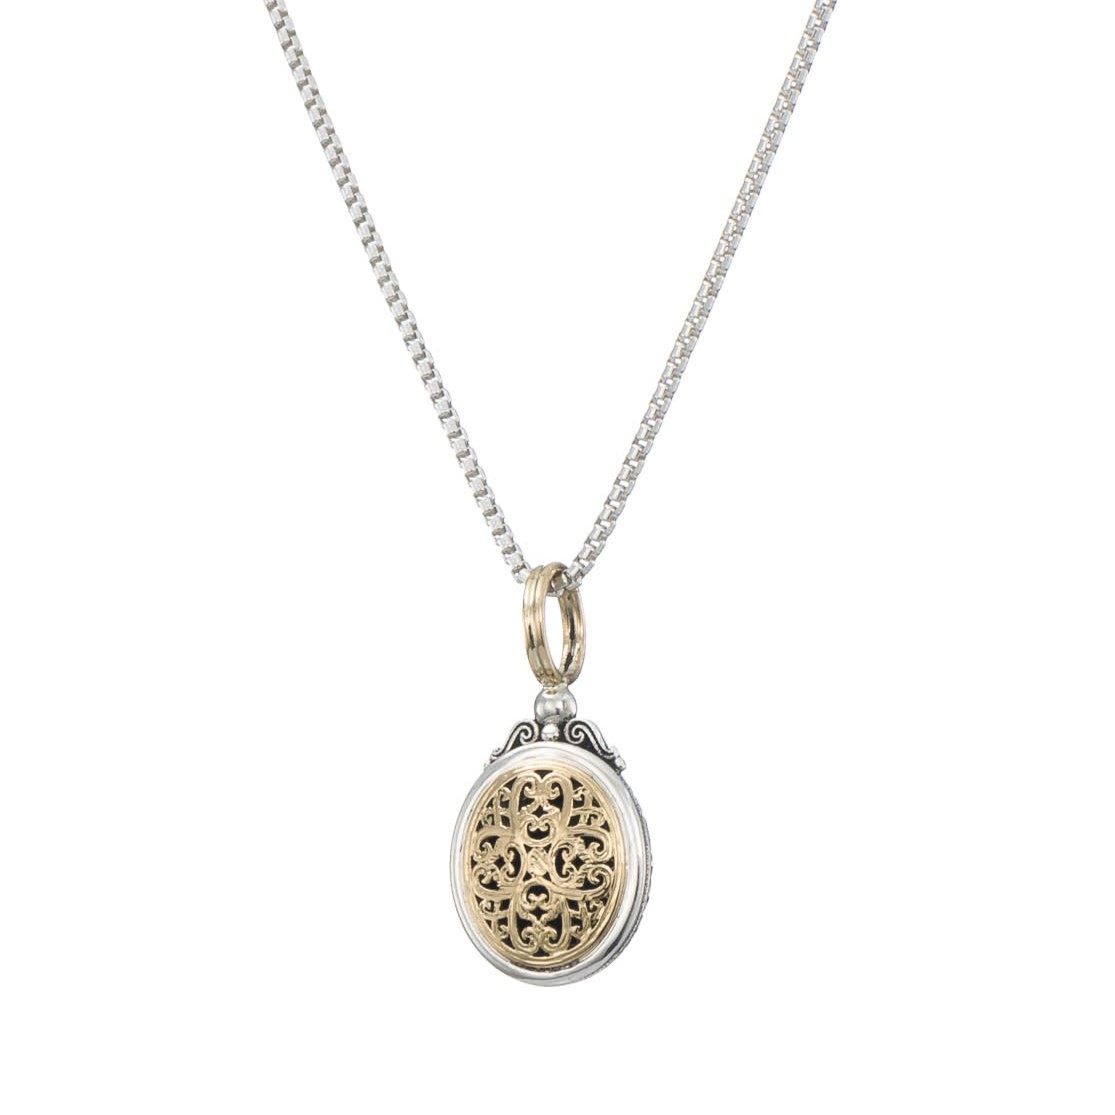 Mediterranean small oval pendant in 18K Gold and Sterling Silver